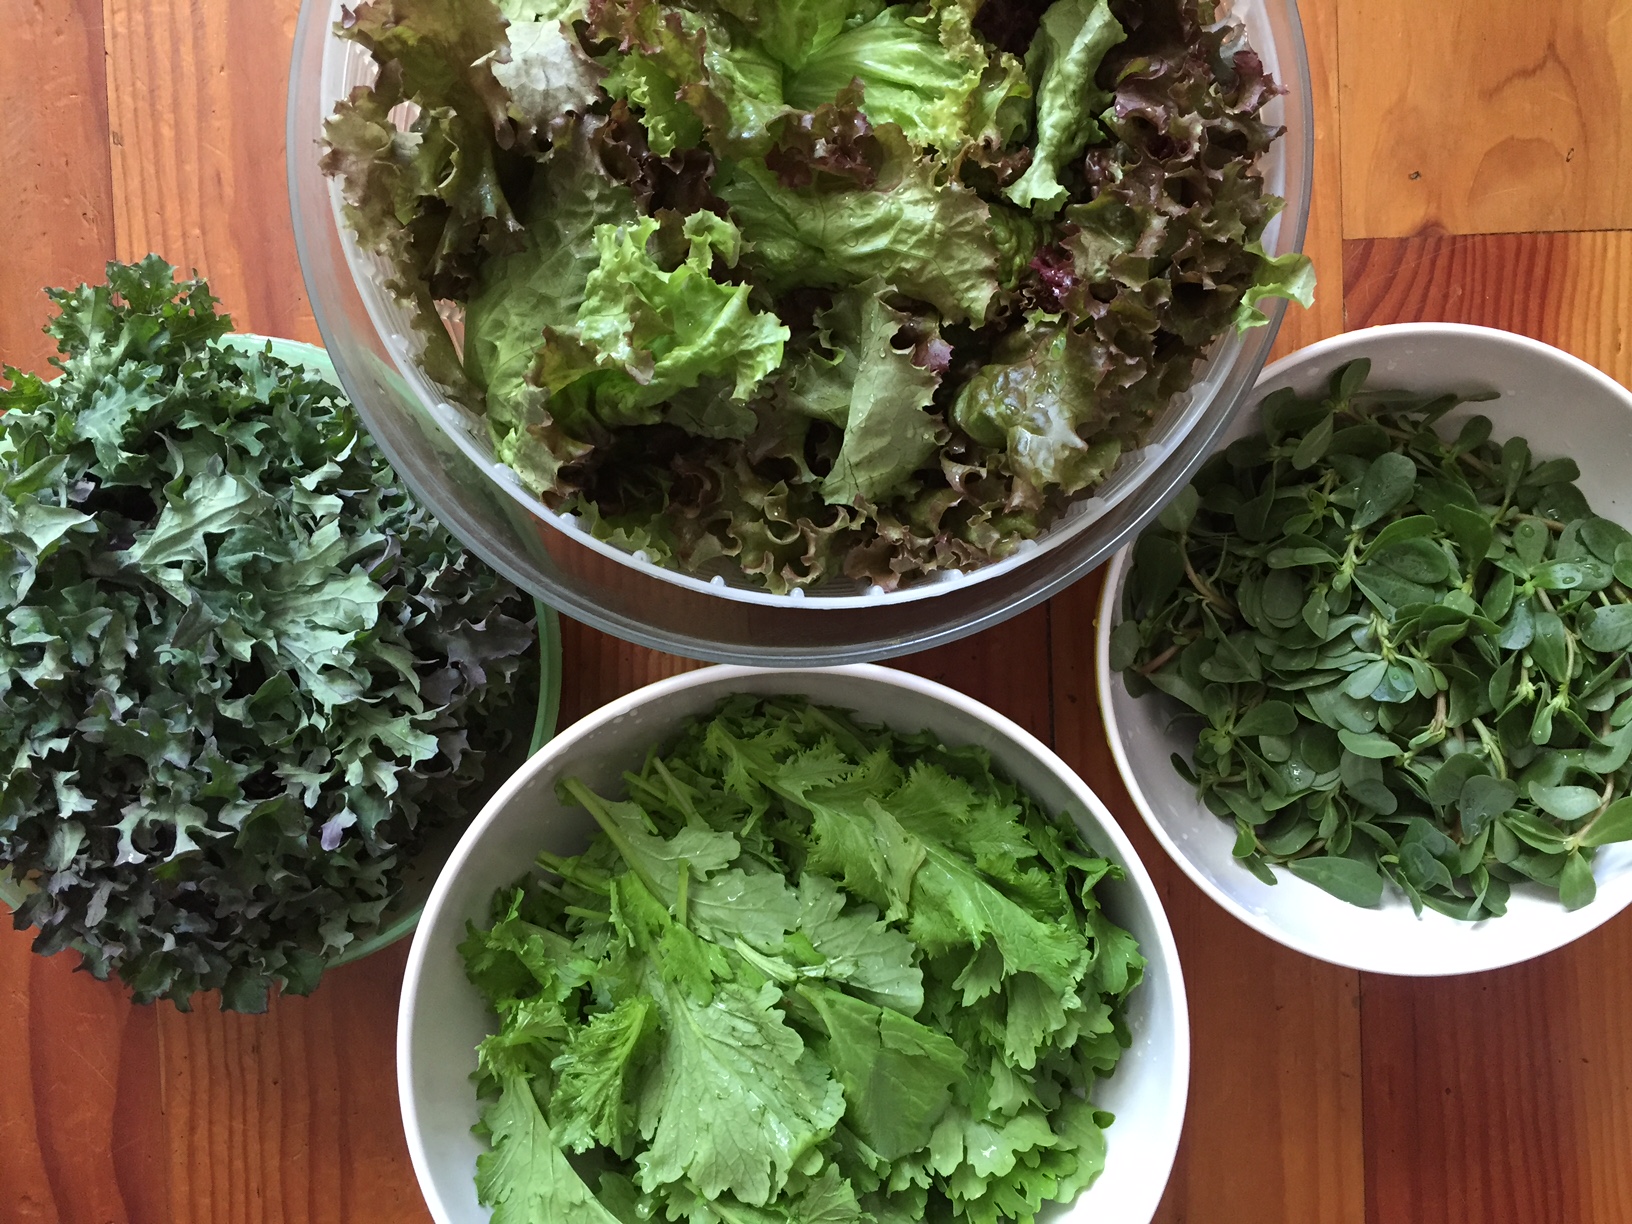 This week’s greens: pizzo, purslane, kale, and red-leaf lettuce.